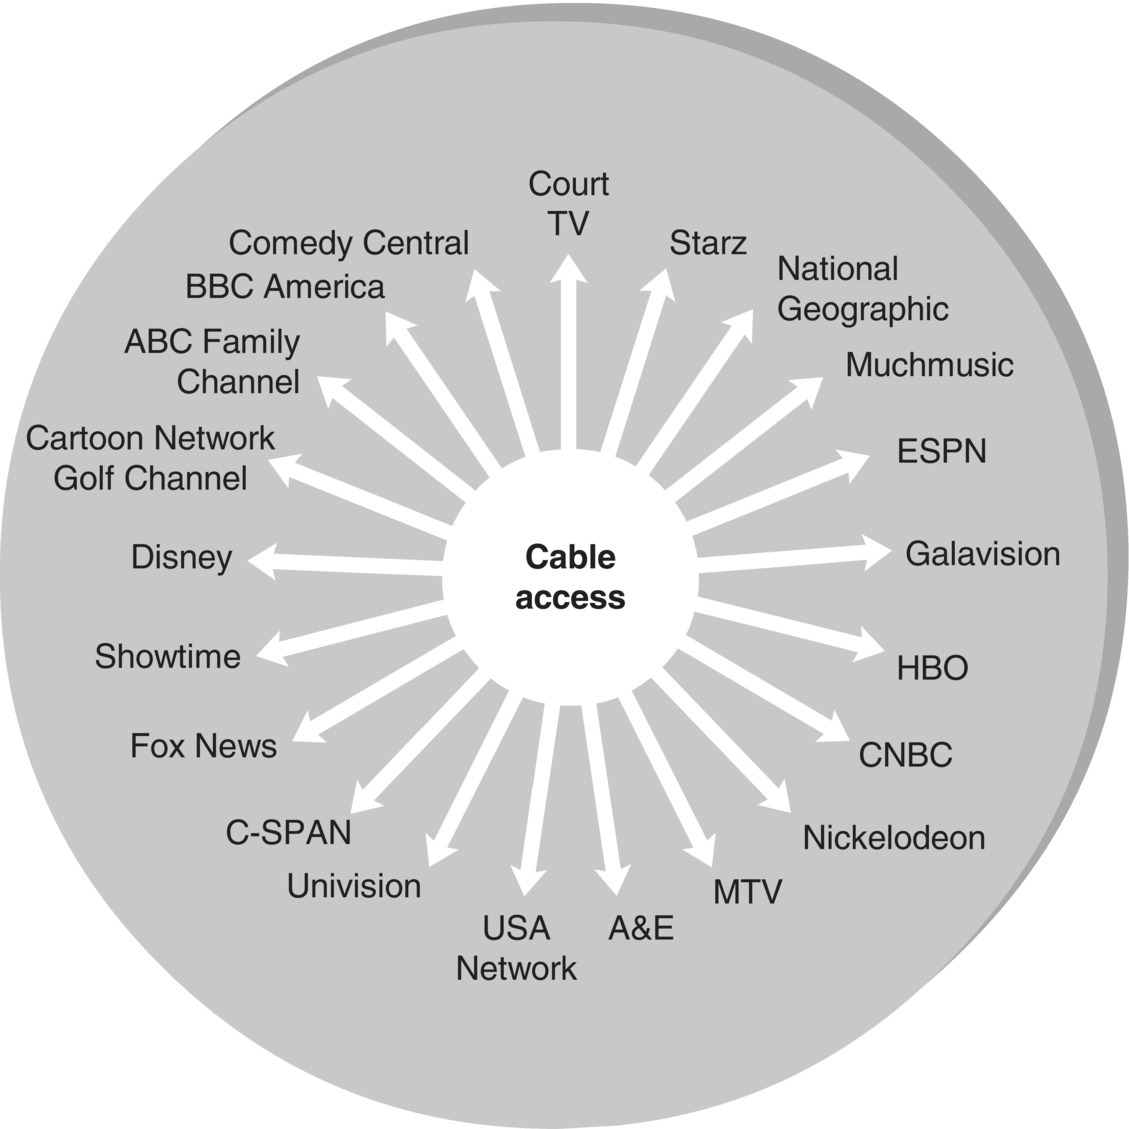 Diagram displaying a disk having a circle at the center labeled “Cable access” with radiating arrows leading to “Court TV,” “Starz,” “National Geographic,” “Muchmusic,” “ESPN,” “Galavision,” “HBO,” “CNBC,” etc.